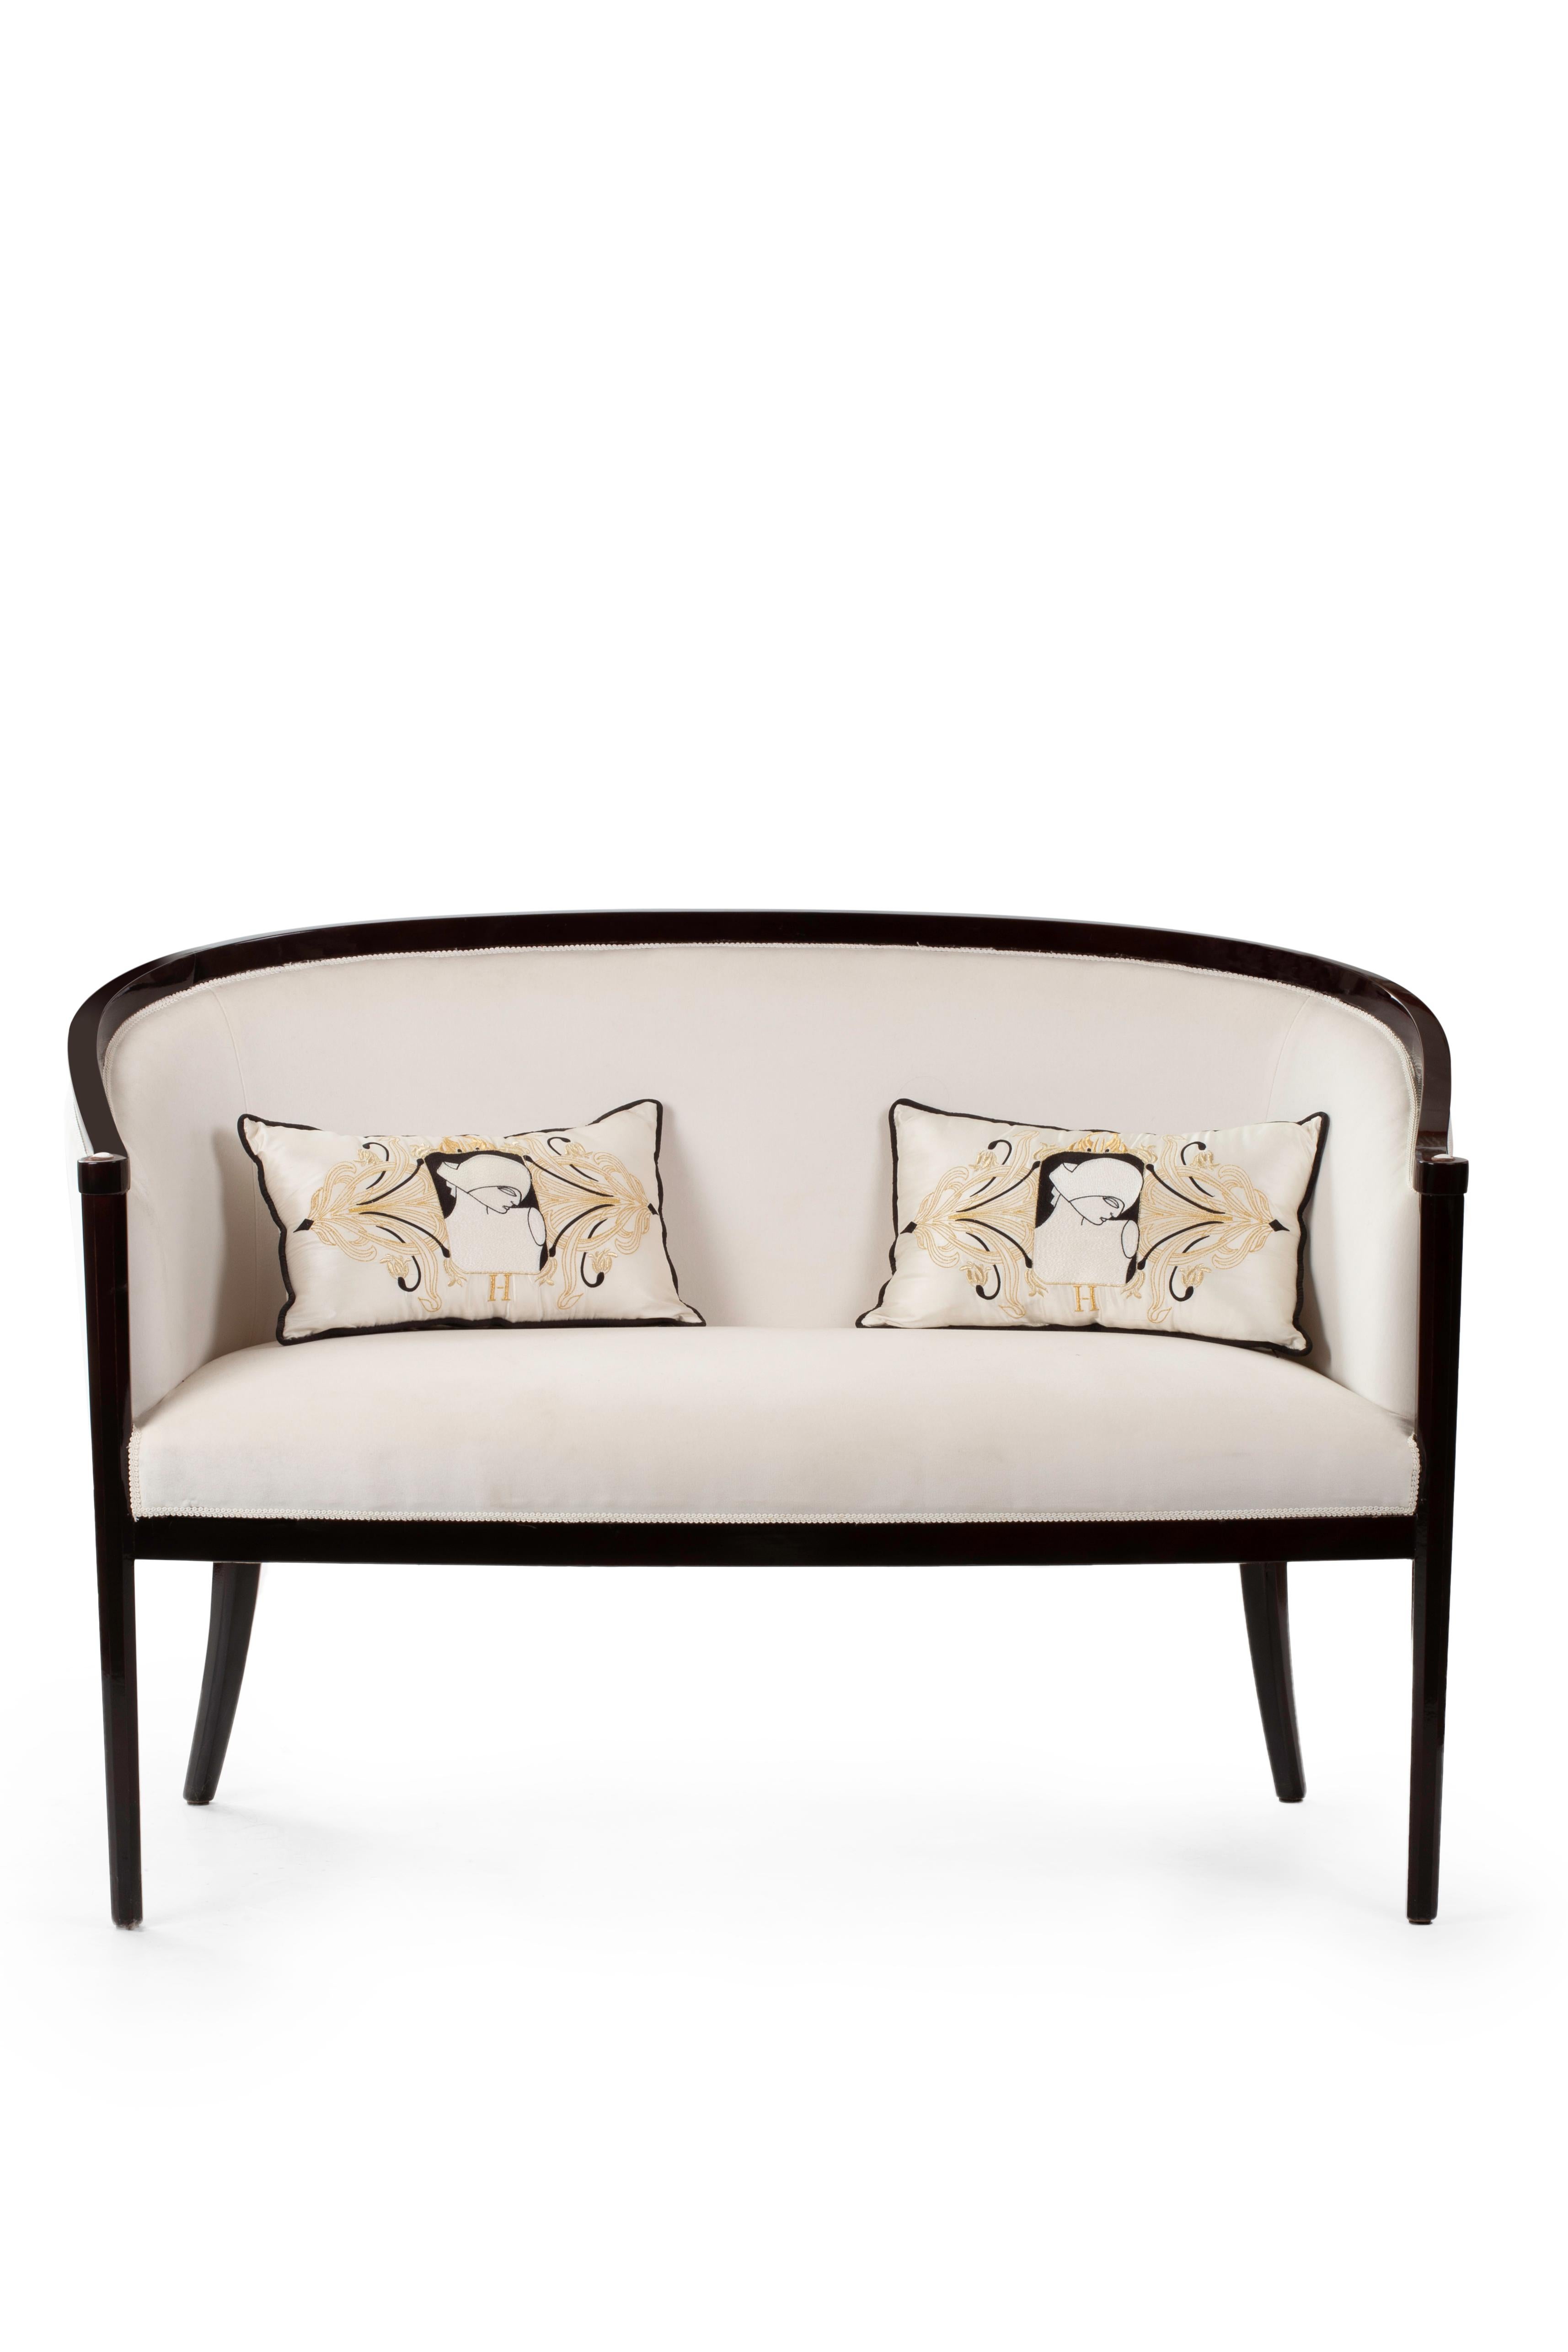 Polished 21st Century Lorsky Sofa, Velvet, Sardonic Shell and Solid Wood, Made in Italy For Sale